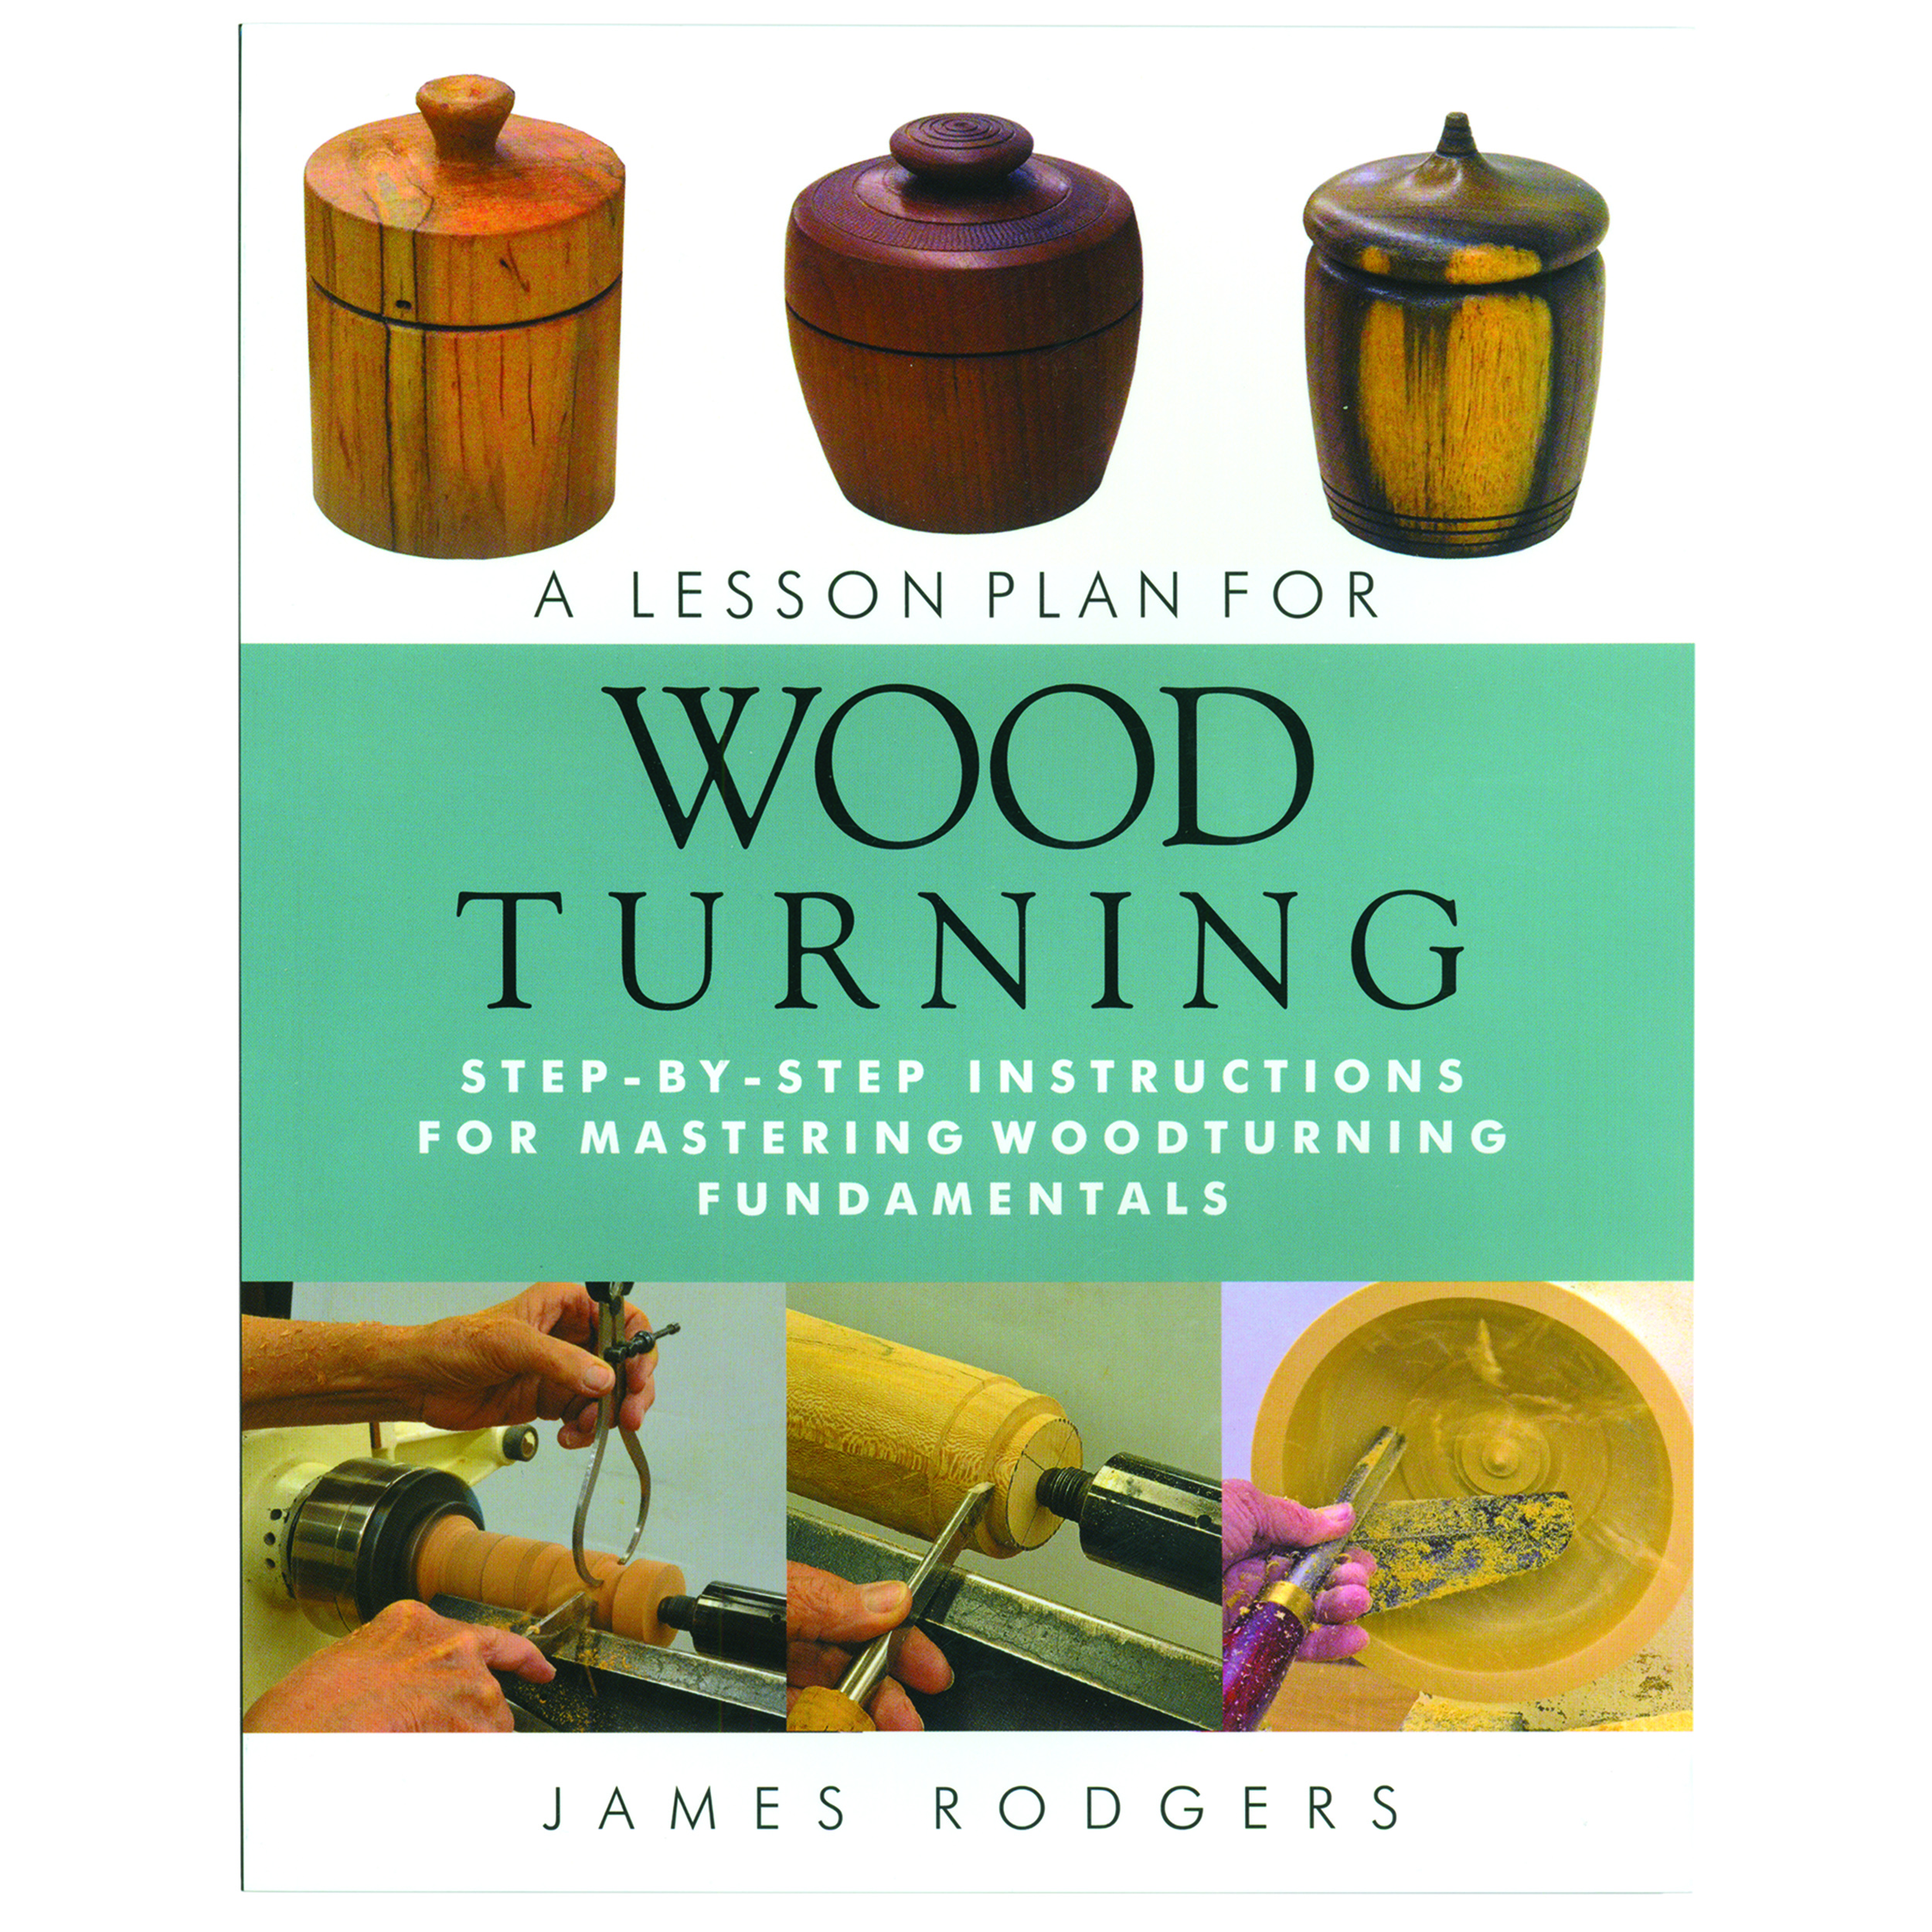 A Lesson Plan For Wood Turning By James Rodgers